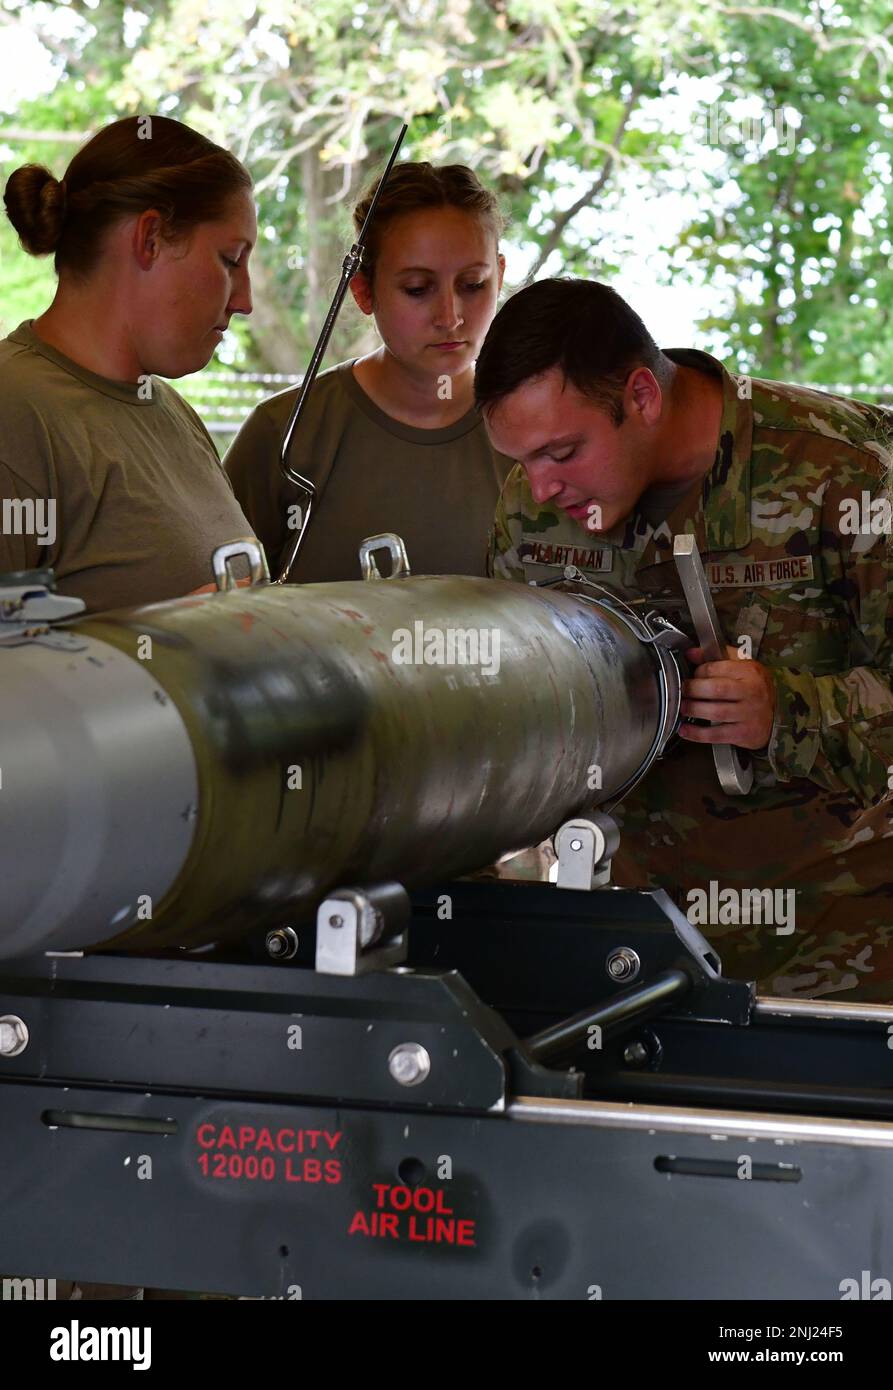 From left, U.S. Air Force Master Sgt. Chelsea R. Thompson, senior munitions controller, and Tech. Sgt. Jolee C. Edge, conventional maintenance crew chief, watch as Staff Sgt. Kaleb E. Hartman, a combat munitions training instructor, explains which items to check for when tightening the front strake straps on a GBU-54 bomb August 4, 2022, at the Fort Wayne Air National Guard base, Fort Wayne, Indiana. Members of the 122nd Fighter Wing Munitions Flight complete refresher training every 18 months. Stock Photo